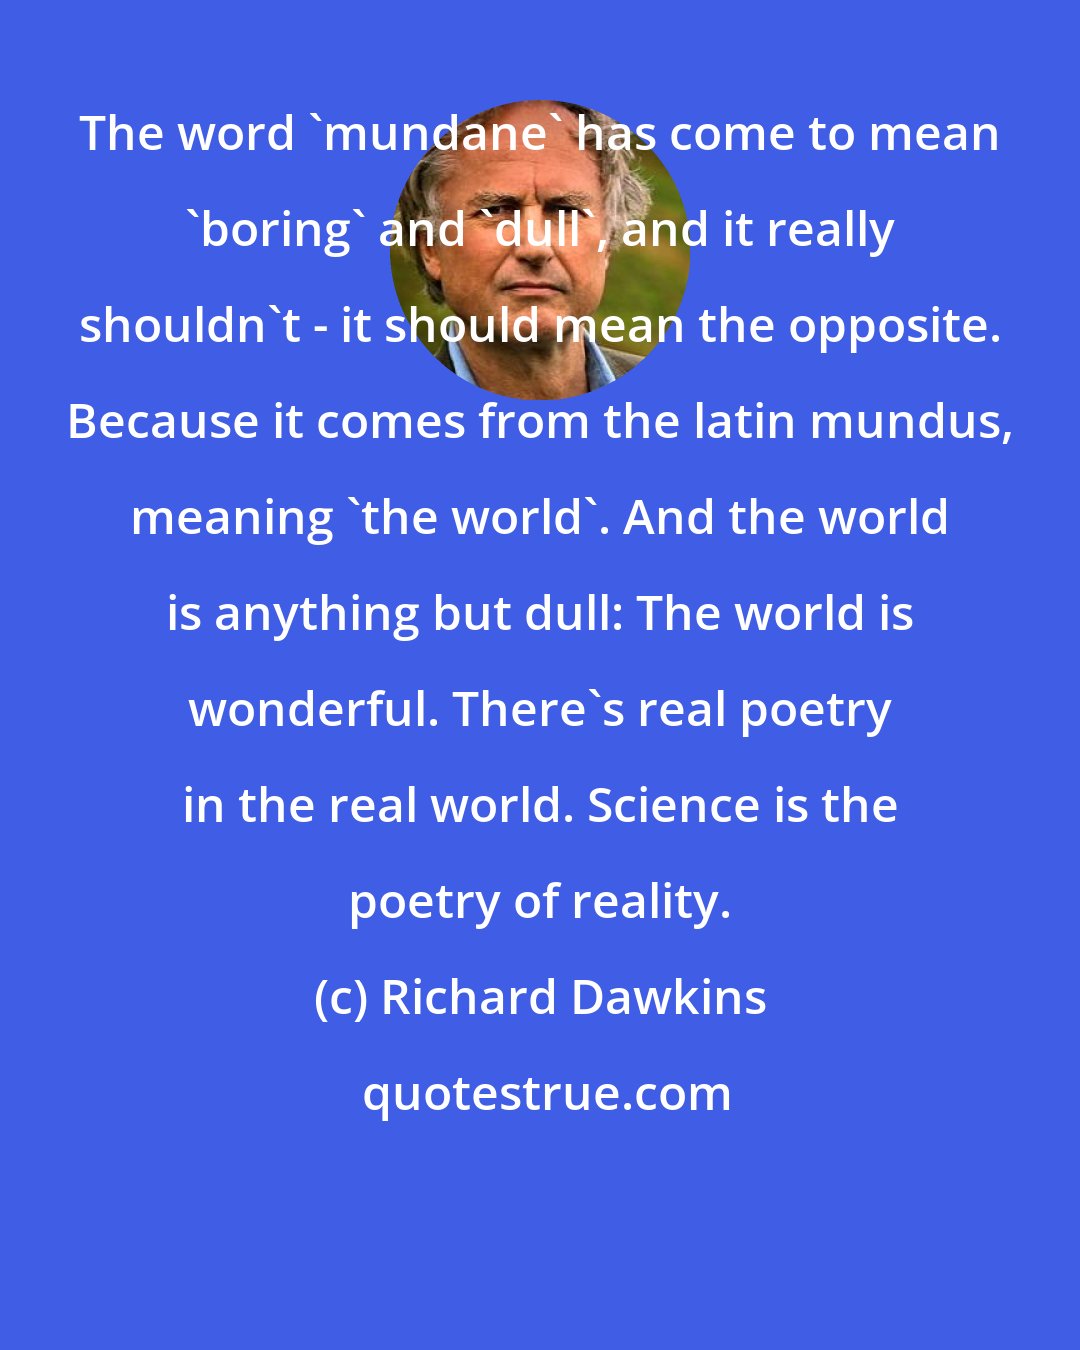 Richard Dawkins: The word 'mundane' has come to mean 'boring' and 'dull', and it really shouldn't - it should mean the opposite. Because it comes from the latin mundus, meaning 'the world'. And the world is anything but dull: The world is wonderful. There's real poetry in the real world. Science is the poetry of reality.